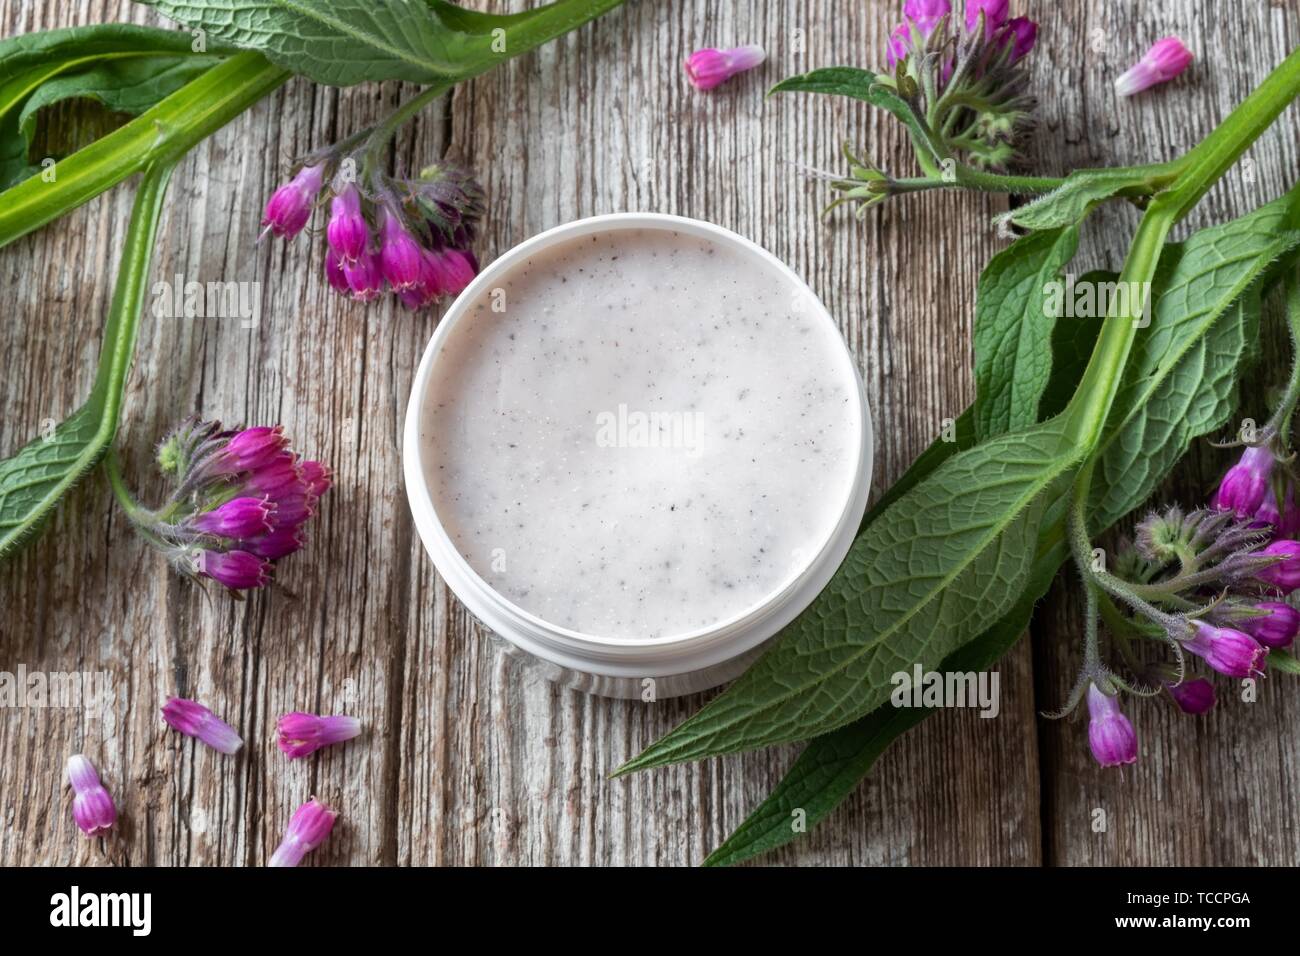 A jar of comfrey root ointment with fresh blooming symphytum officinale plant. Stock Photo